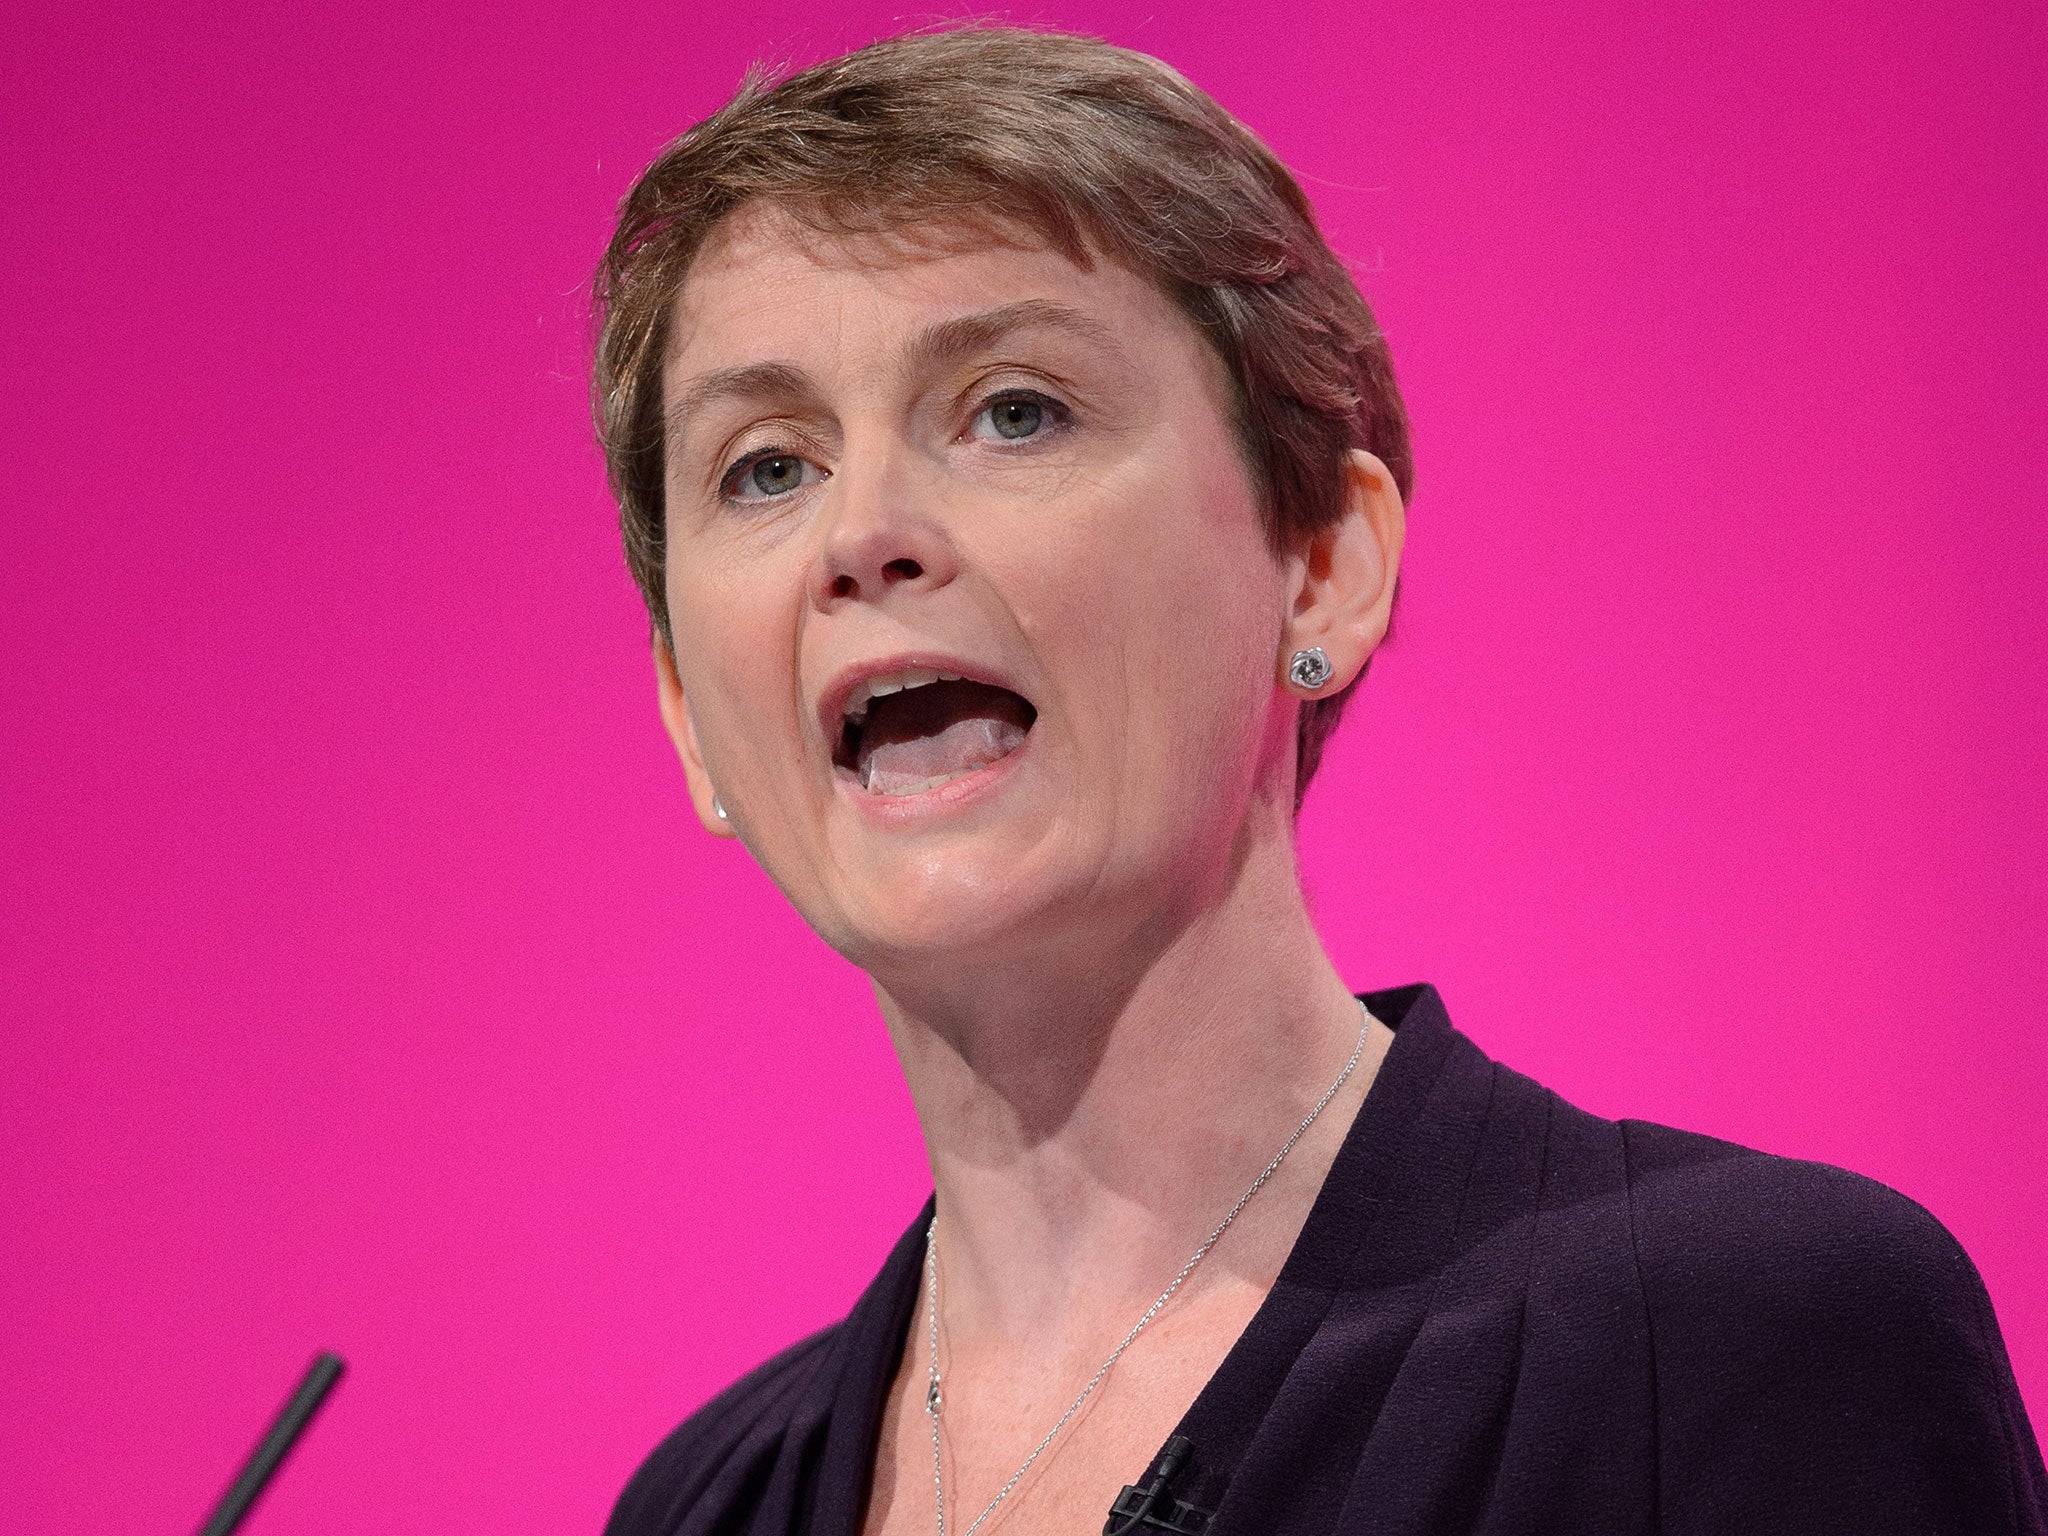 Yvette Cooper hopes to become Labour leader